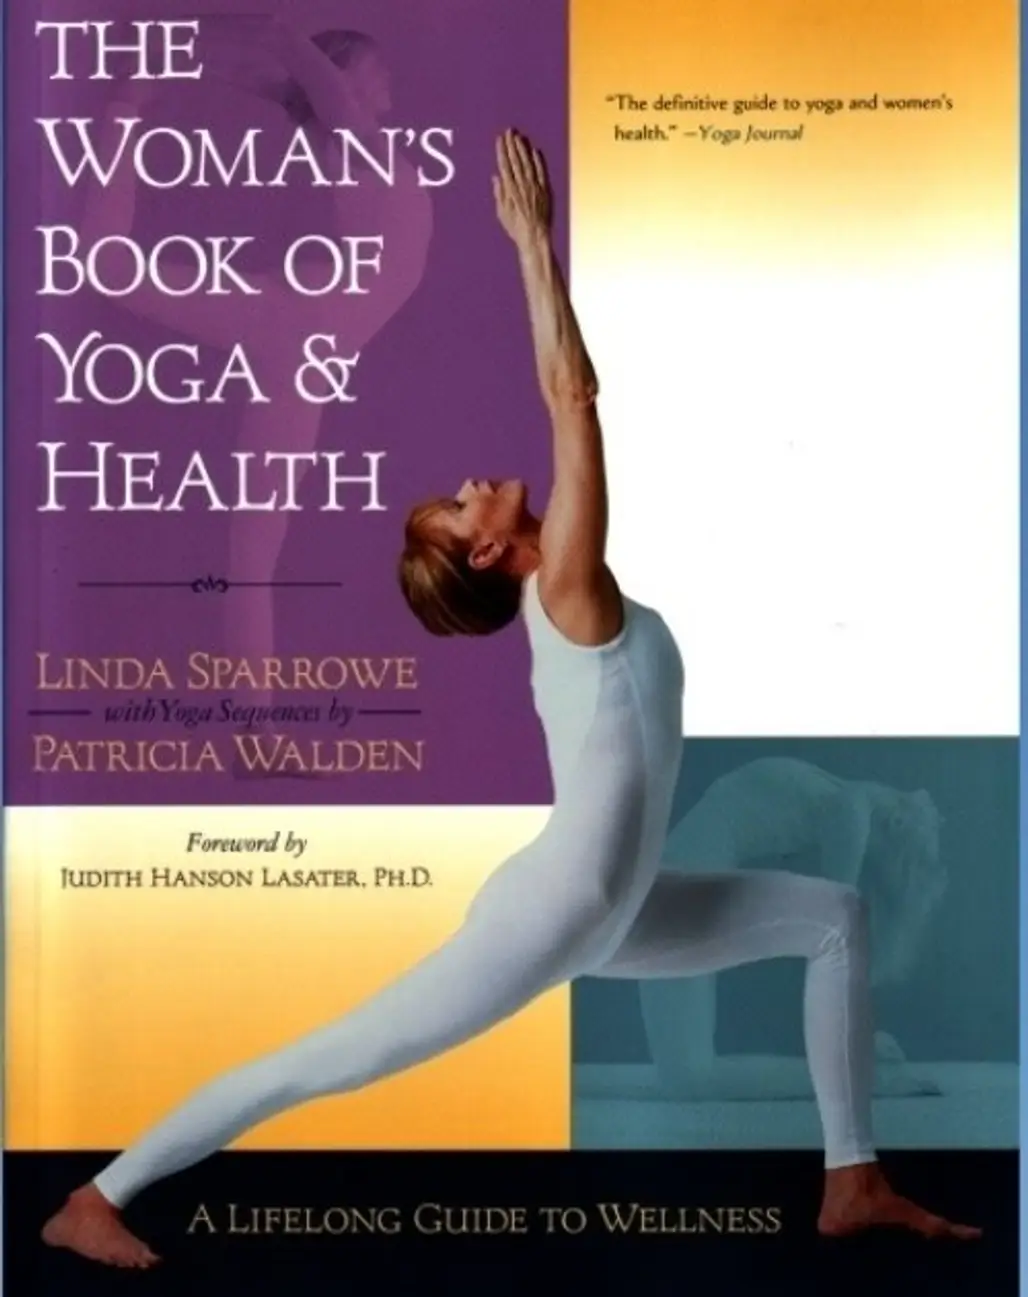 The Woman’s Book of Yoga and Health – by Linda Sparrowe, Patricia Walden, Judith Hanson Lasater